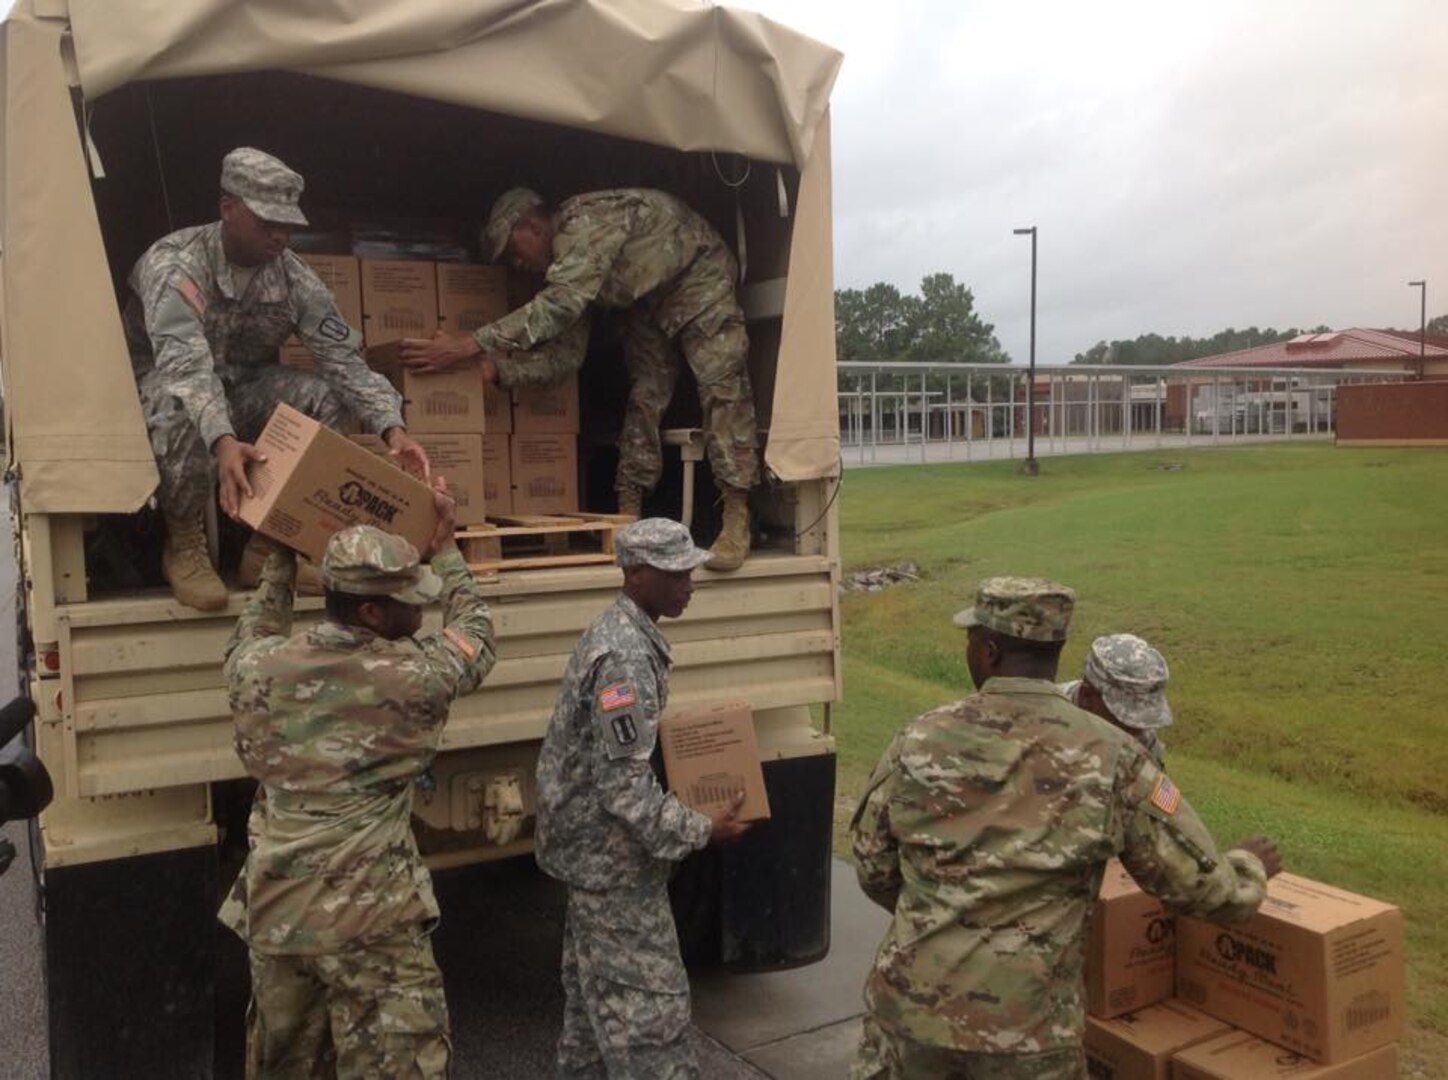 South Carolina National Guard Soldiers with the 1053rd Transportation Company deliver meals ready to eat to the emergency shelter at Westview Middle School, Goose Creek, S.C., Oct. 7, 2016, in advance of Hurricane Matthew. Multiple shelters have been established in the low country to assist citizens affected by the storm.